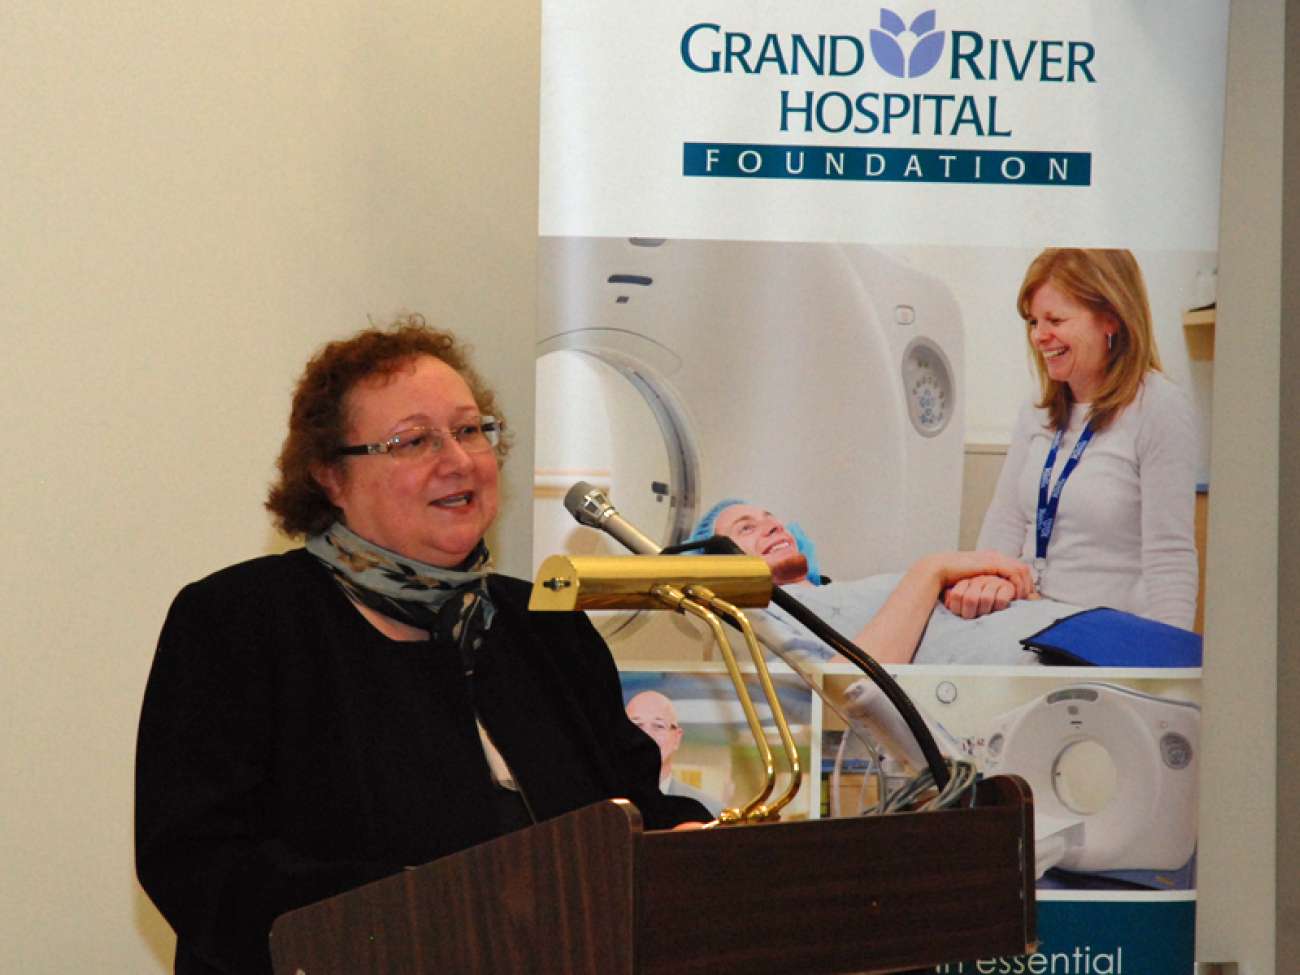 GRH Foundation president and CEO Tracey Bailey says 3,333 donors and groups contributed to the new CT scanner.